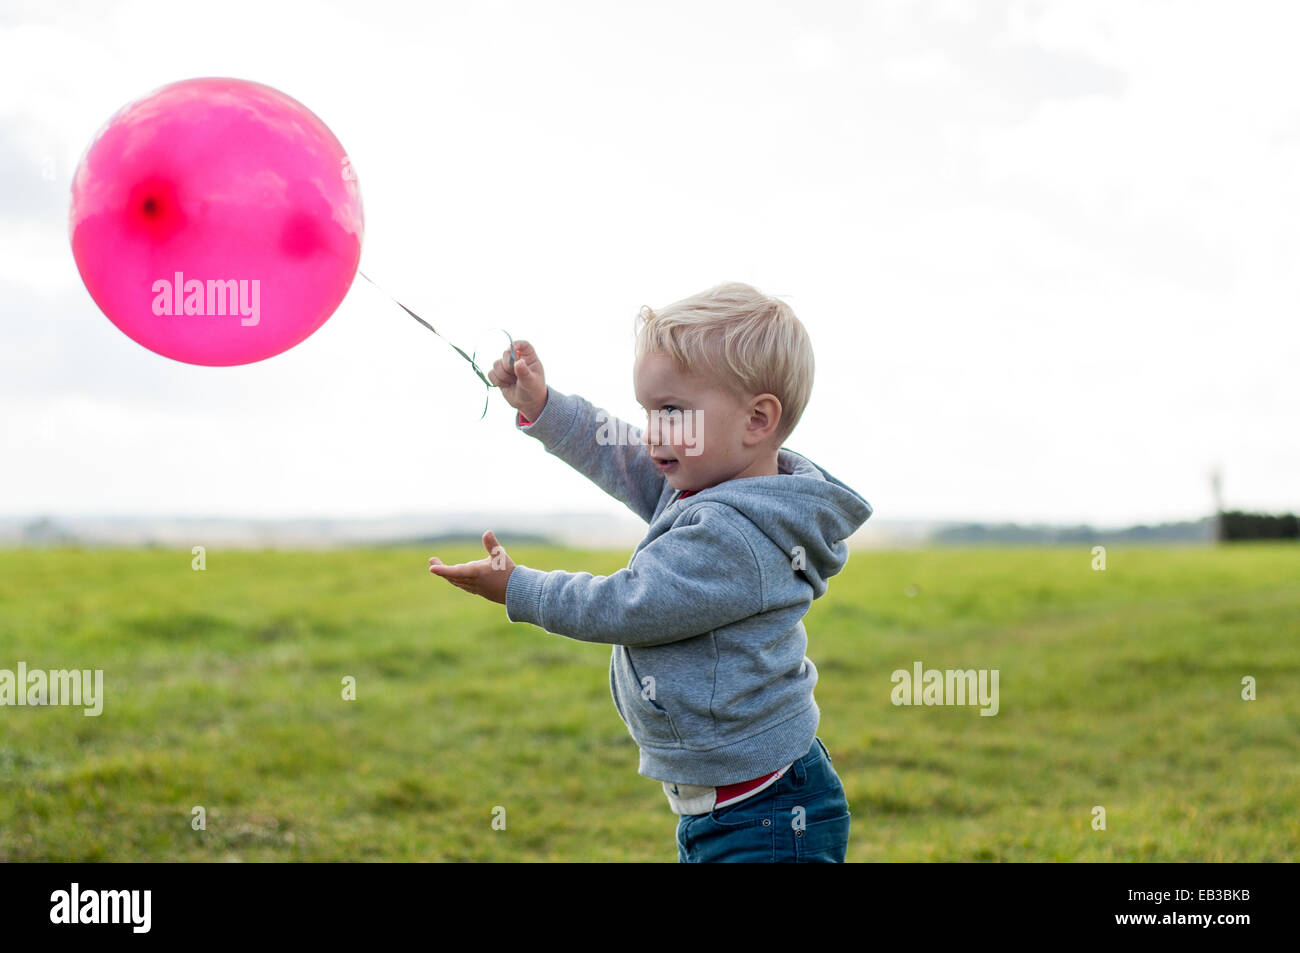 Boy standing in a field balloon Banque D'Images